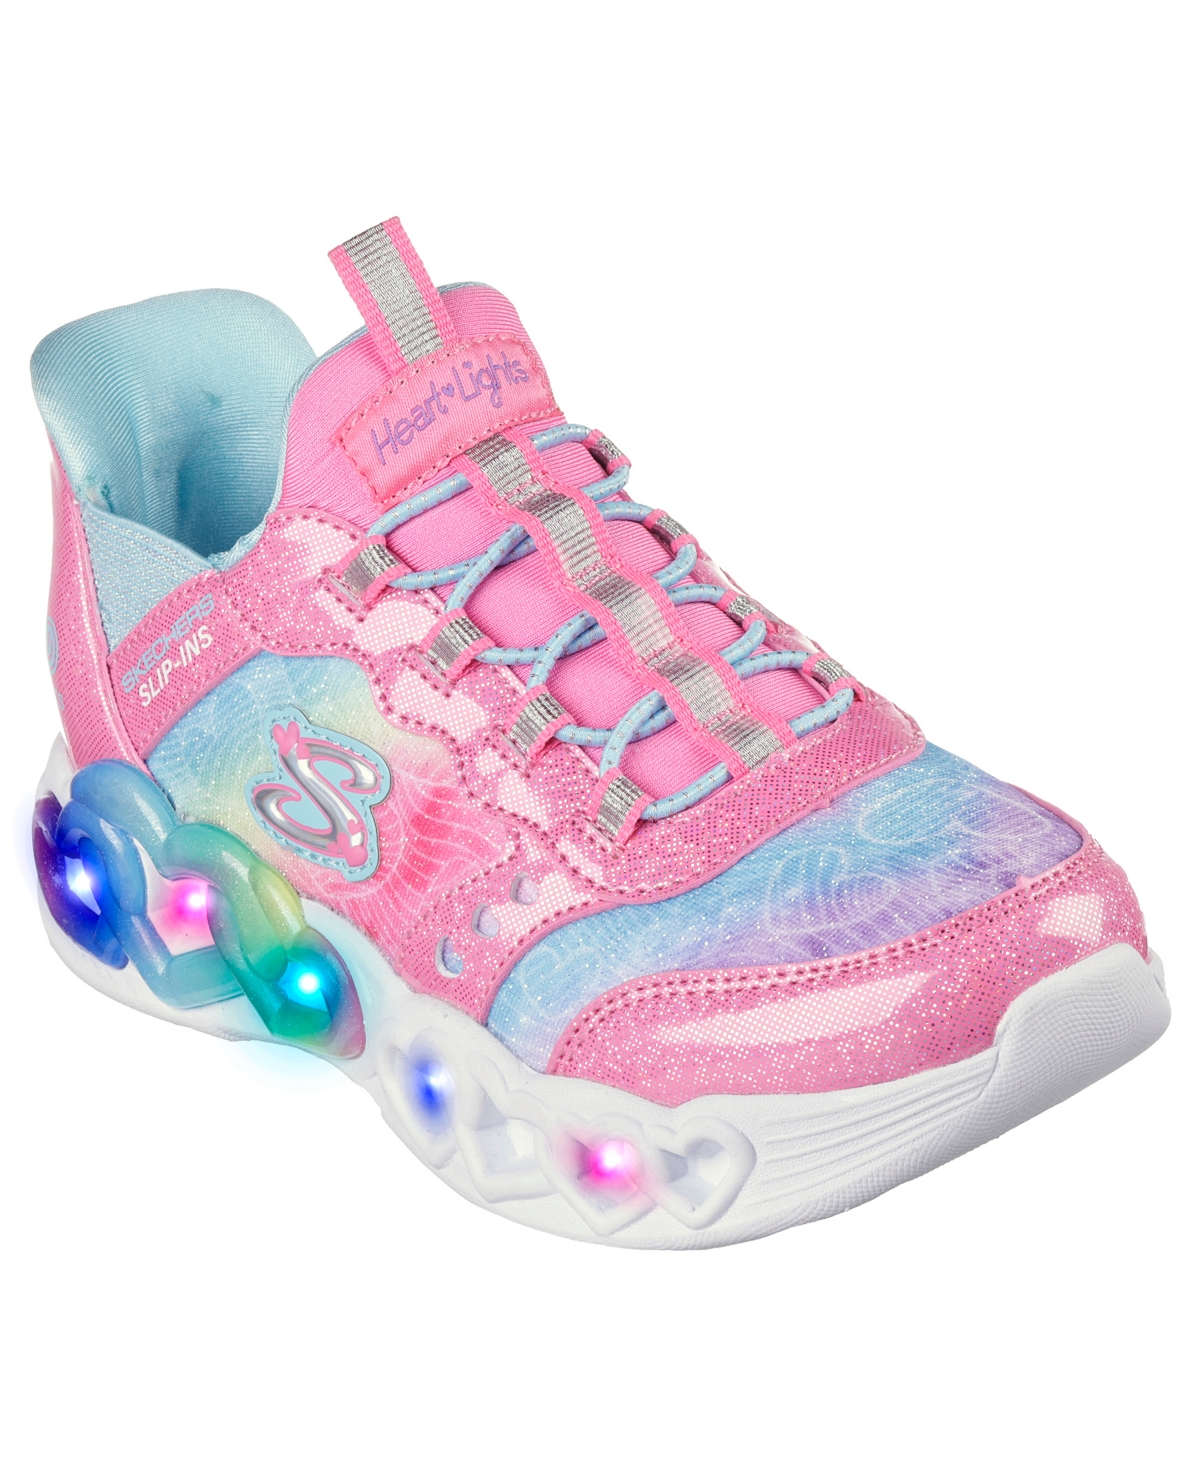 Skechers Kids' Little Girls Slip-ins- Infinite Heart Lights Light-up Stay-put Closure Casual Sneakers From Finish L In Pink,multi